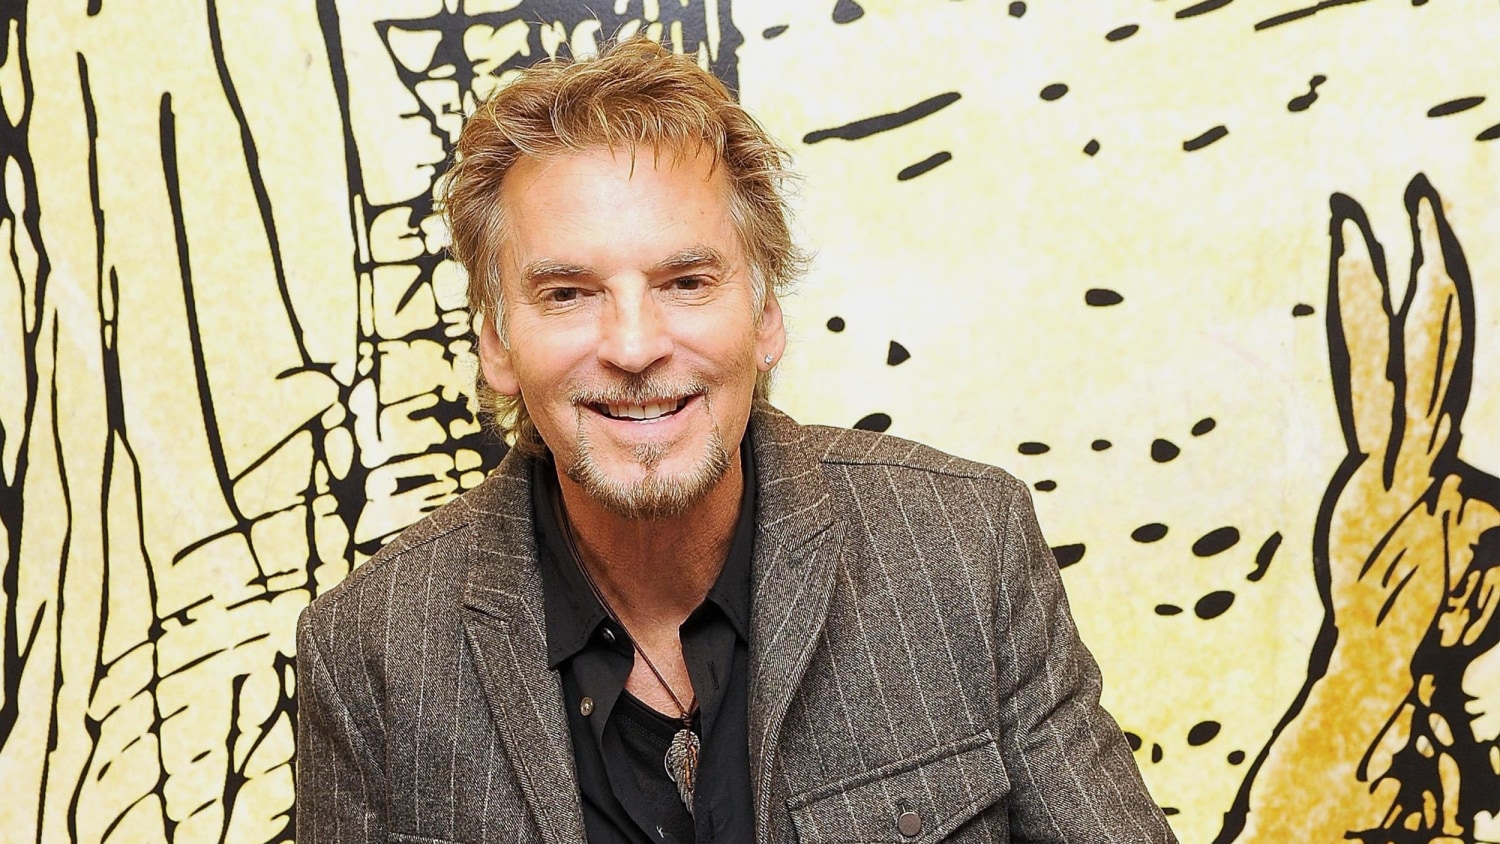 Kenny Loggins becomes a grandfather, shares baby photo: 'This is why I'm here'